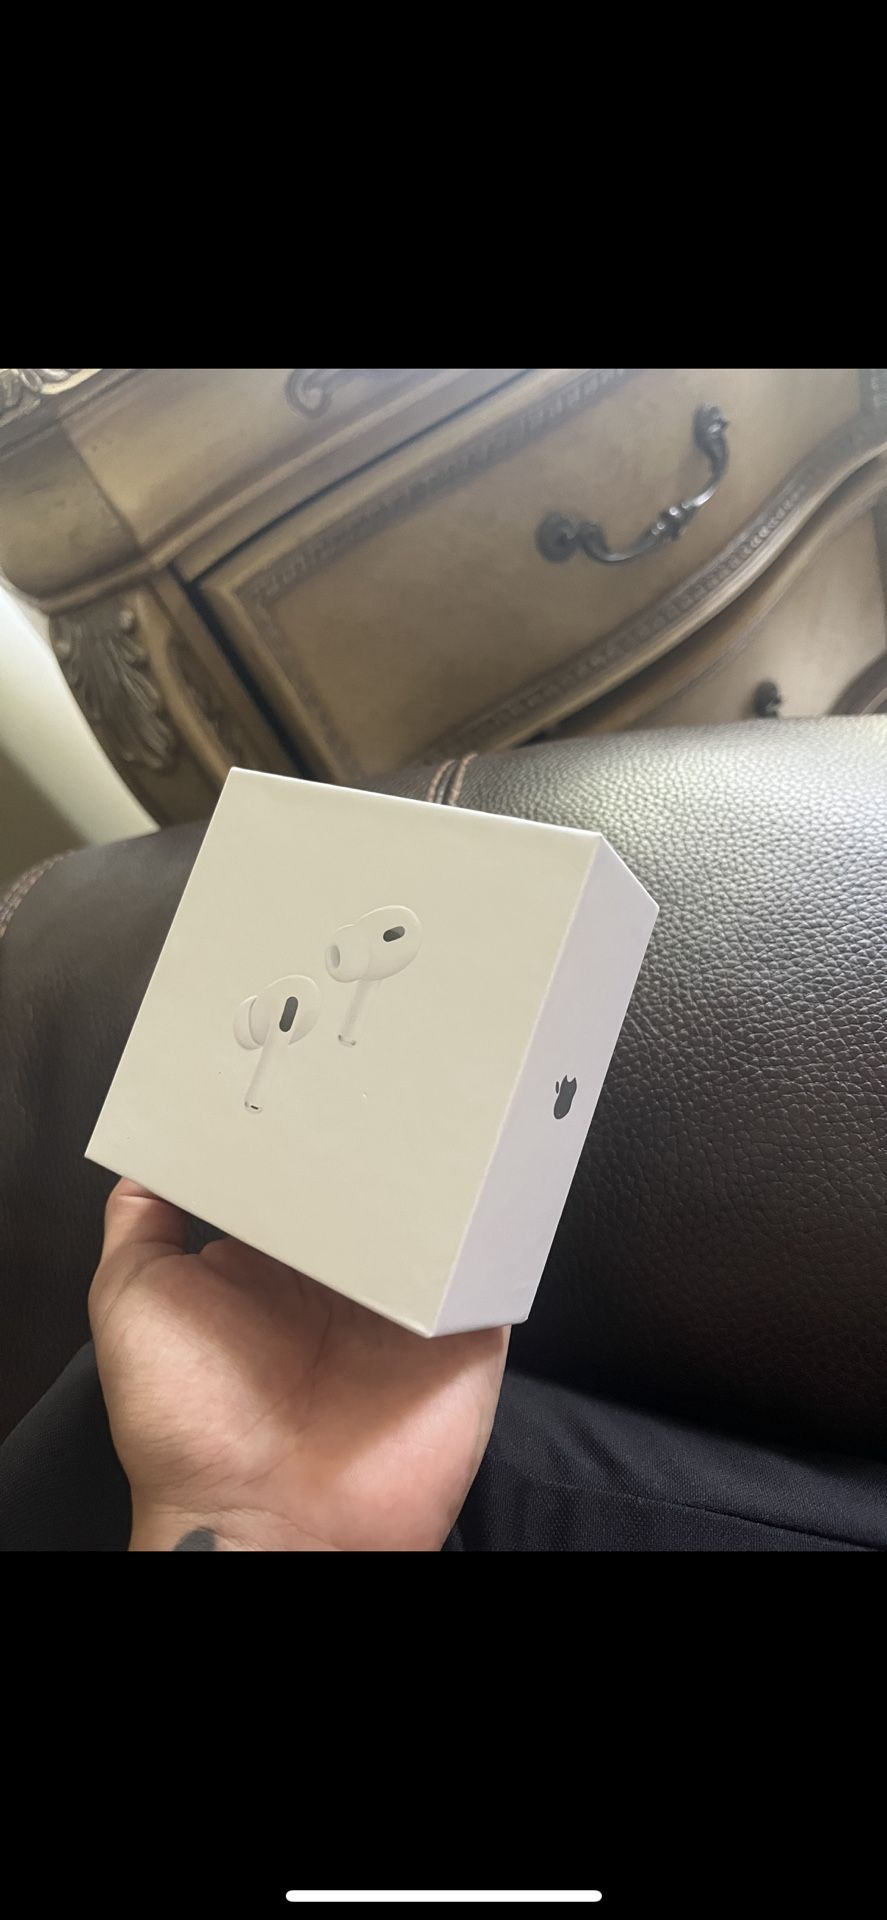 Apple Airpods Pro 2 (never opened) 